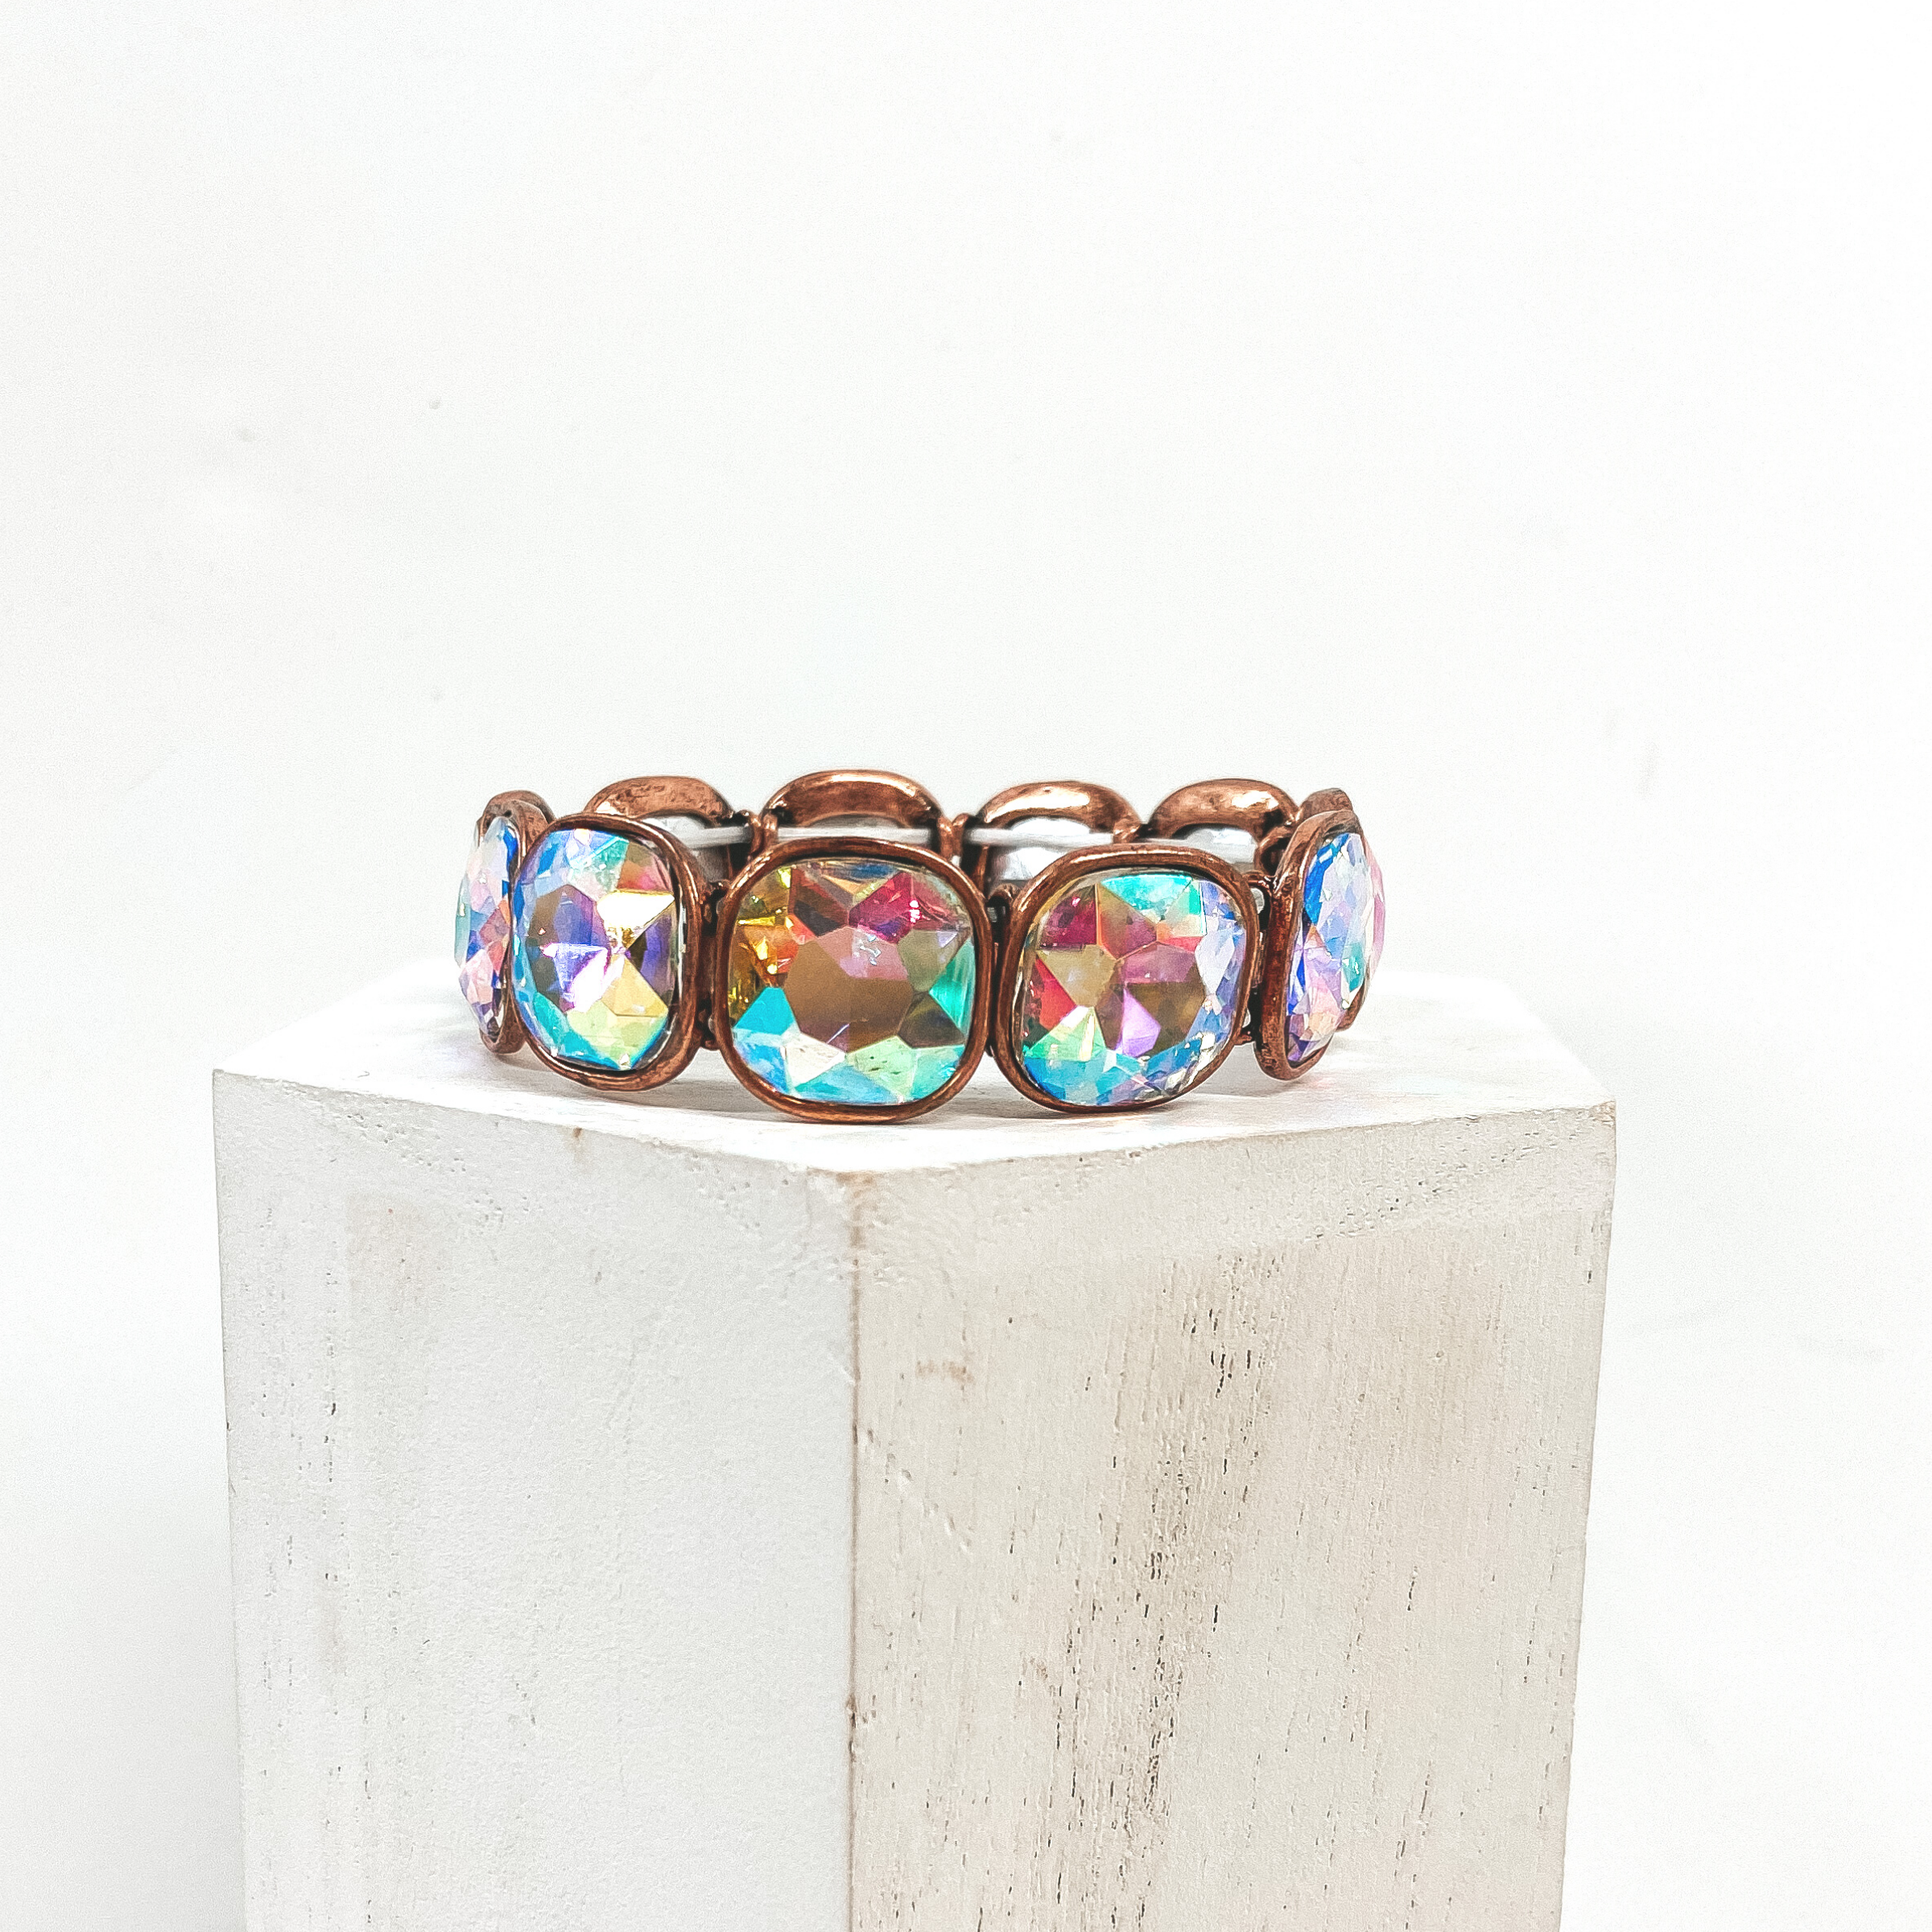 A square crystal bracelet with a copper outline. Placed on white column against white background.